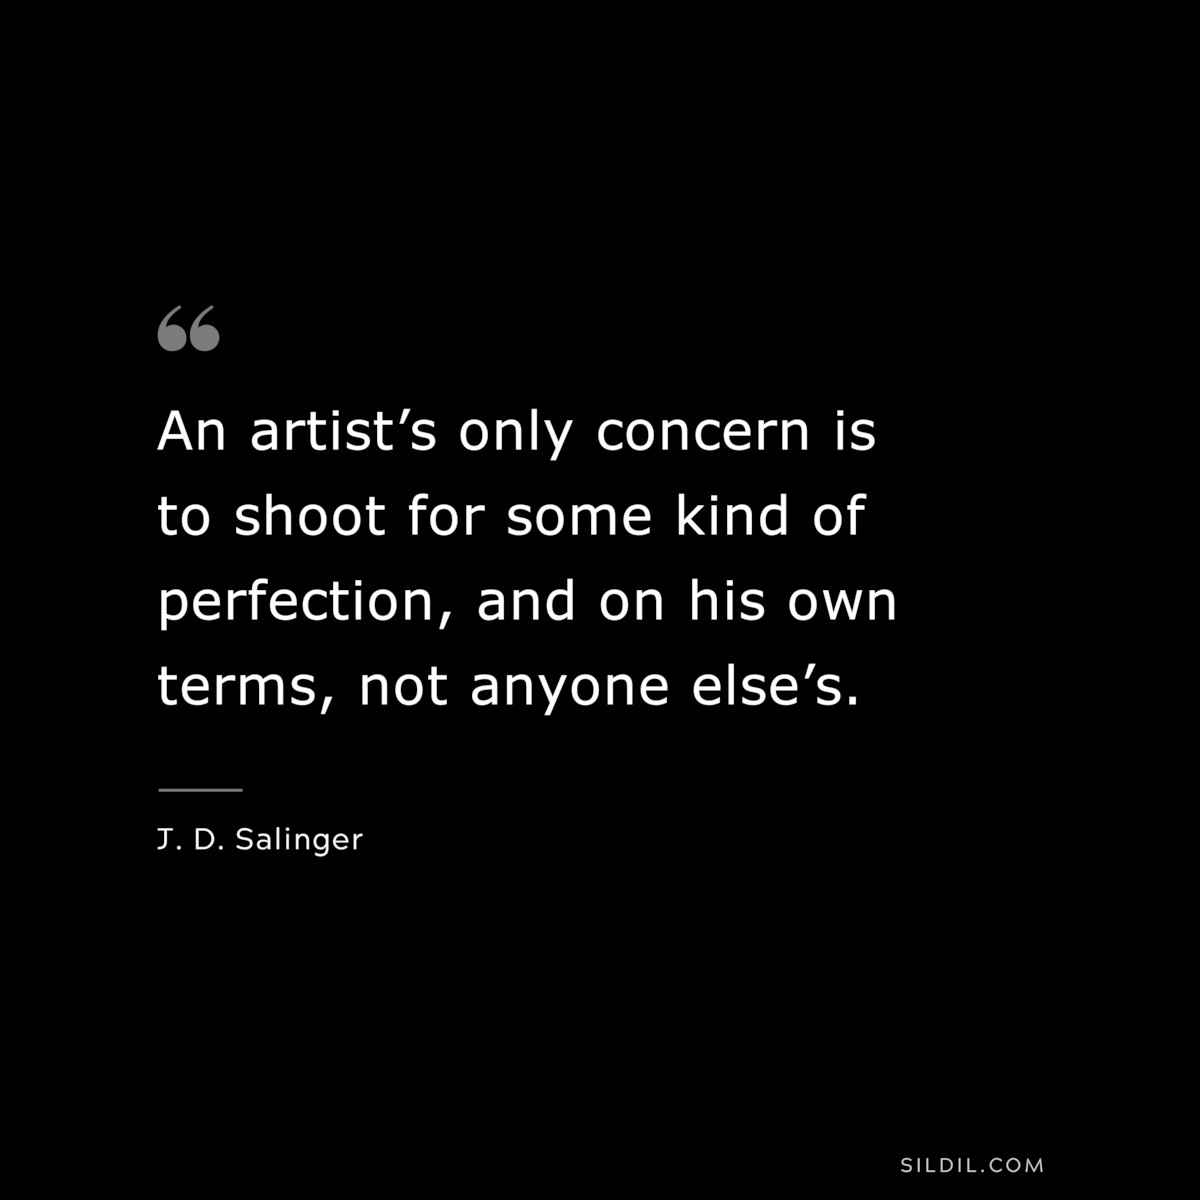 An artist’s only concern is to shoot for some kind of perfection, and on his own terms, not anyone else’s. — J. D. Salinger